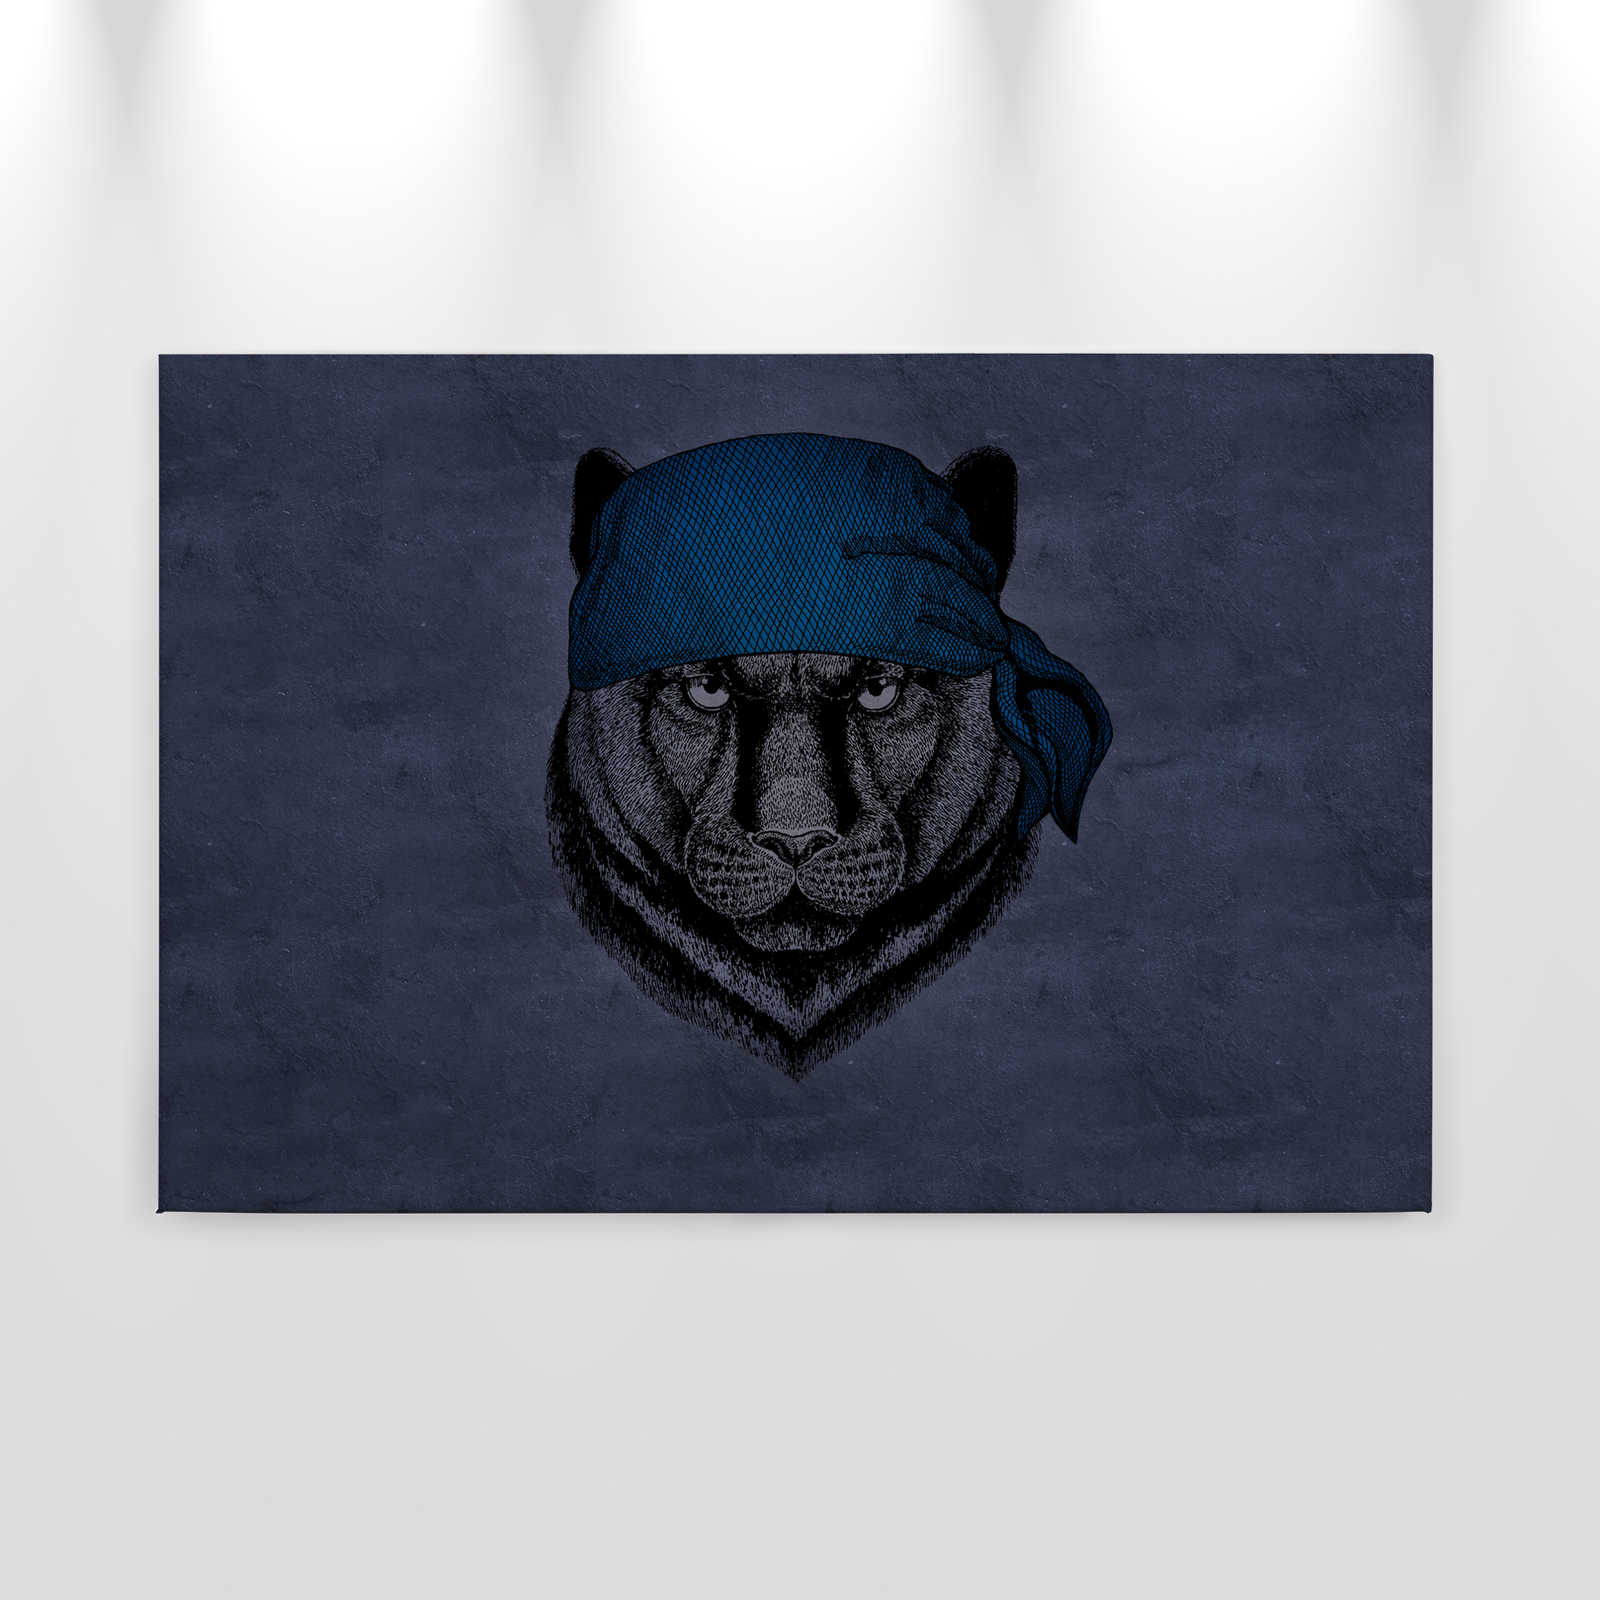             Canvas painting Panther in Pirate Look - 0,90 m x 0,60 m
        